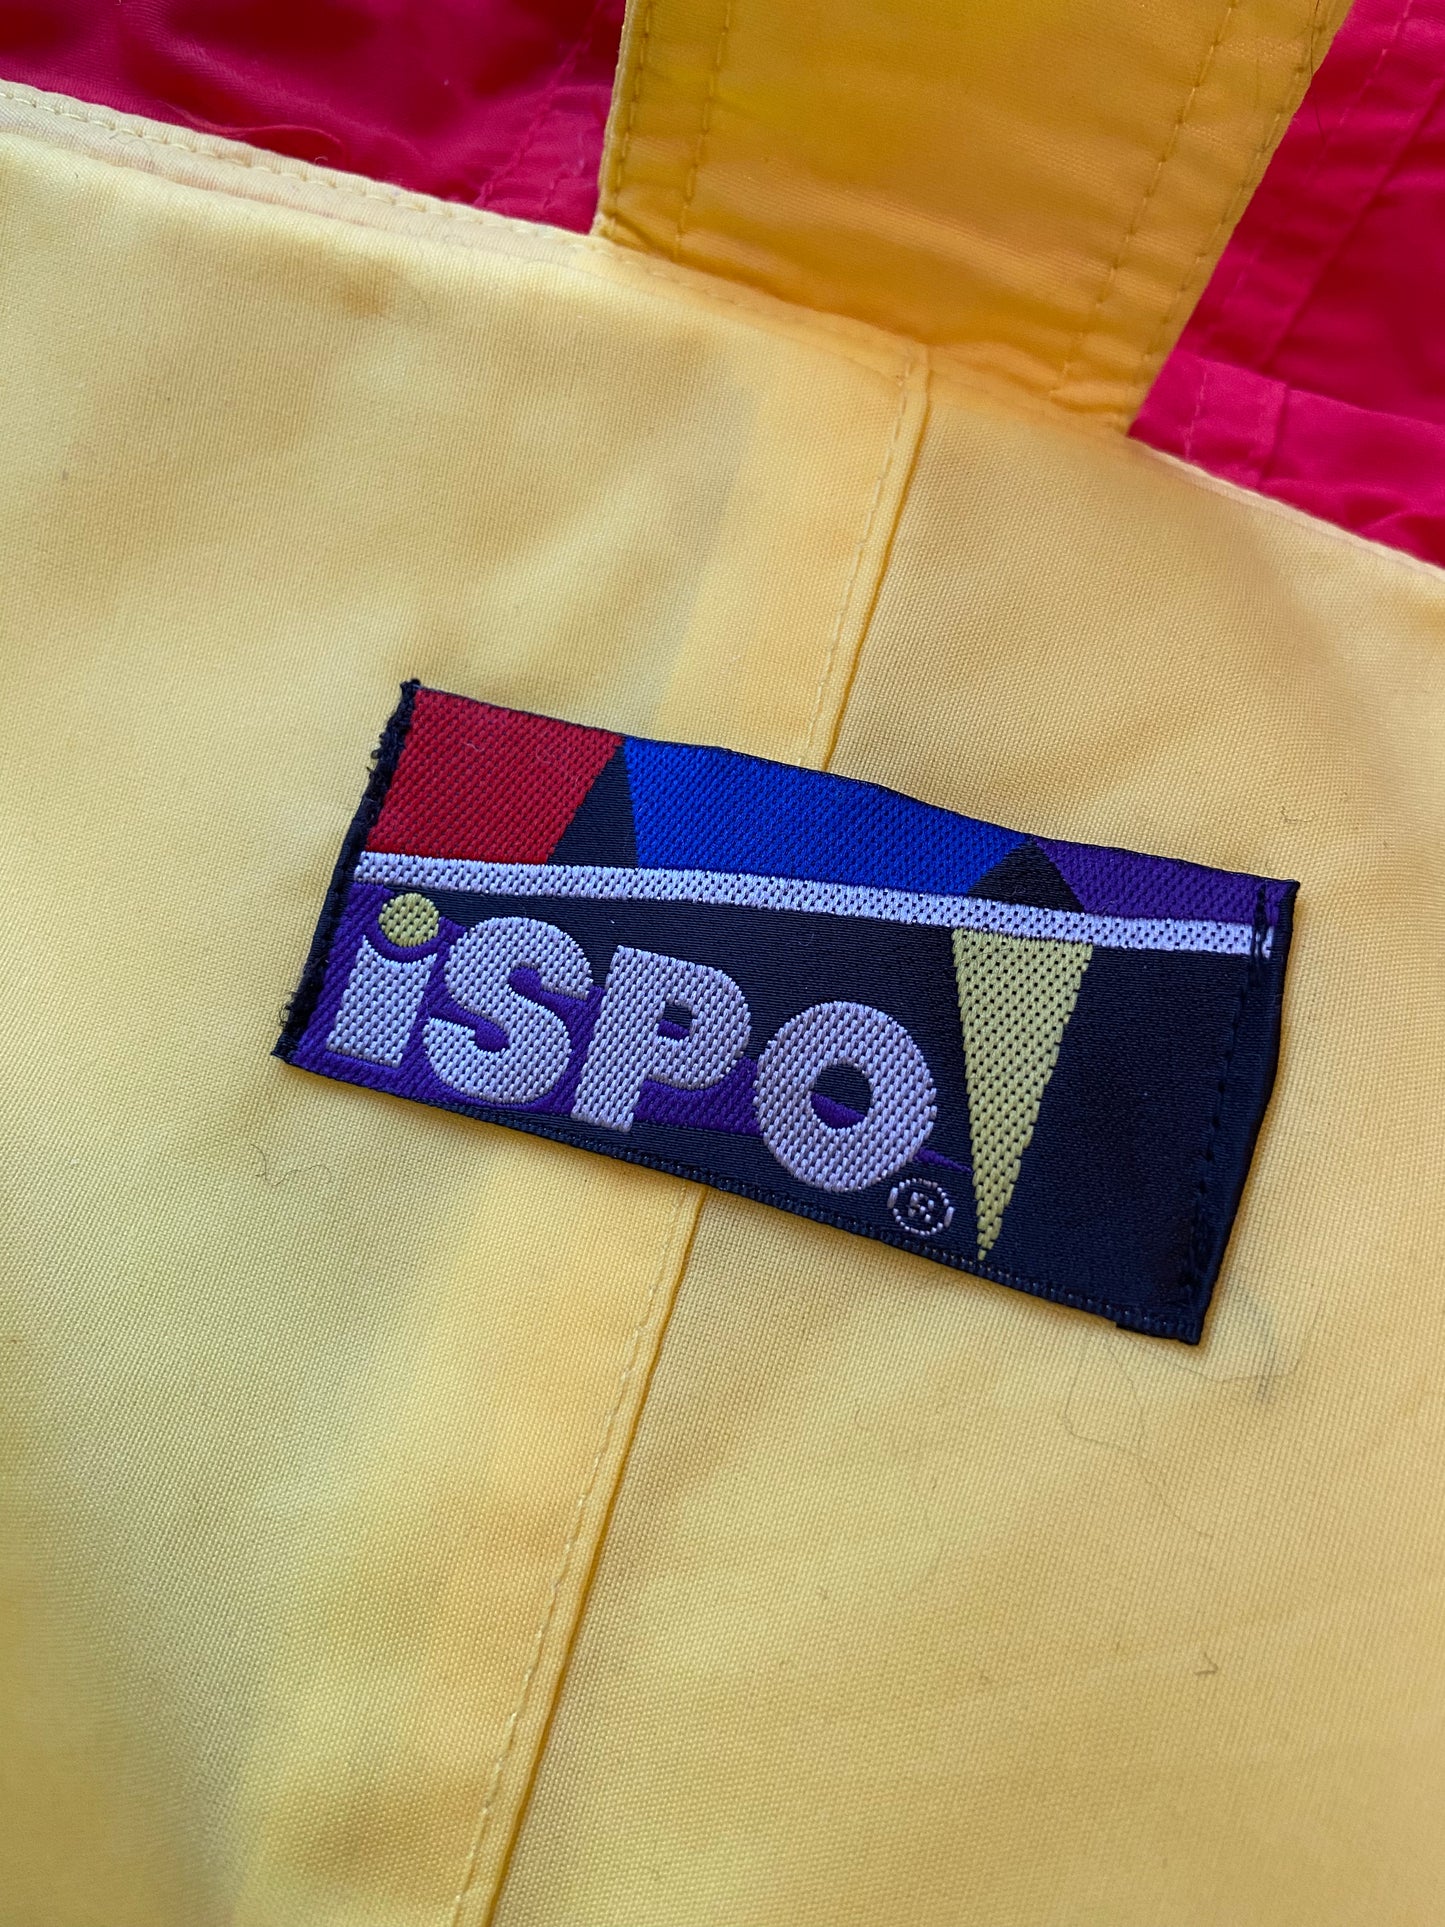 Ispo Yellow & Red Colorblock Jacket